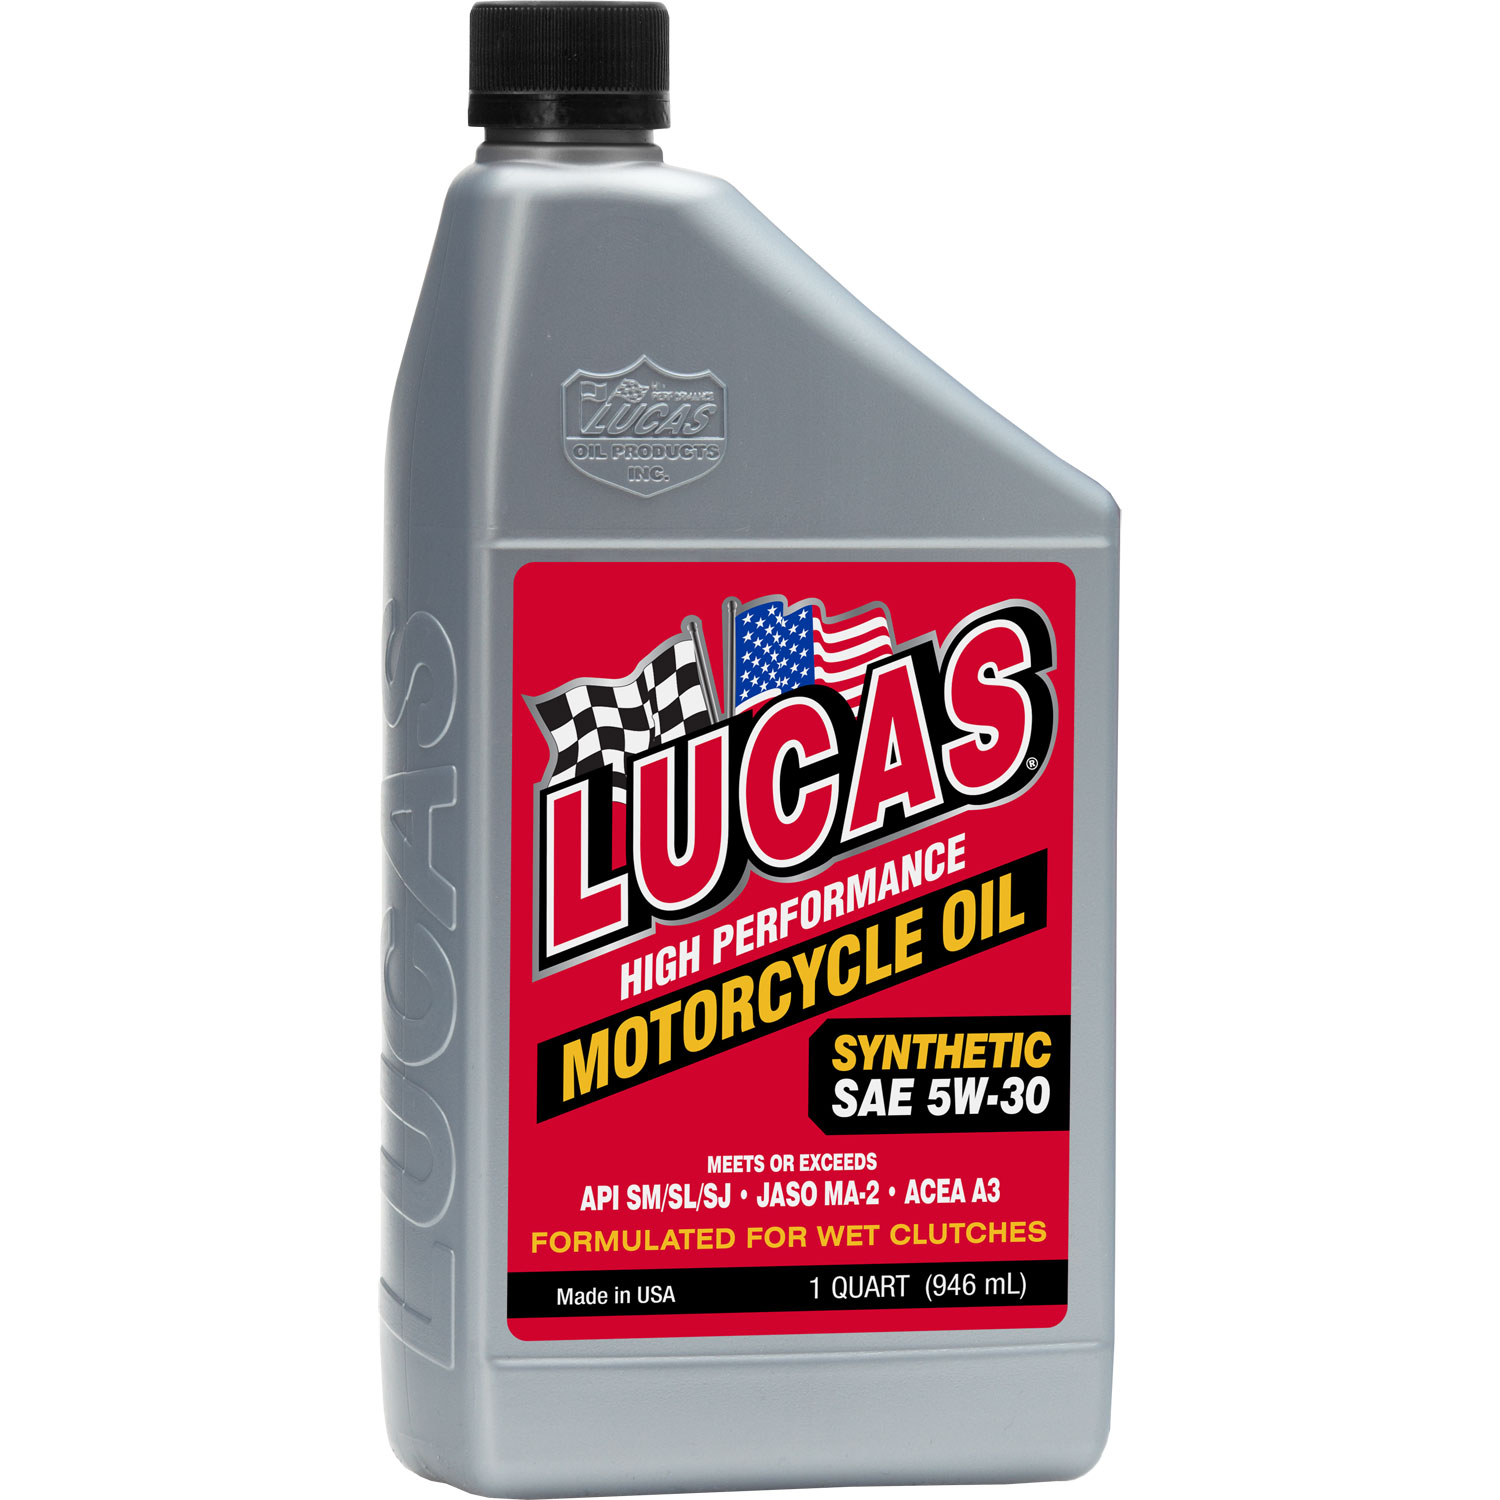 Synthetic SAE 5W-30 Motorcycle Oil Quart